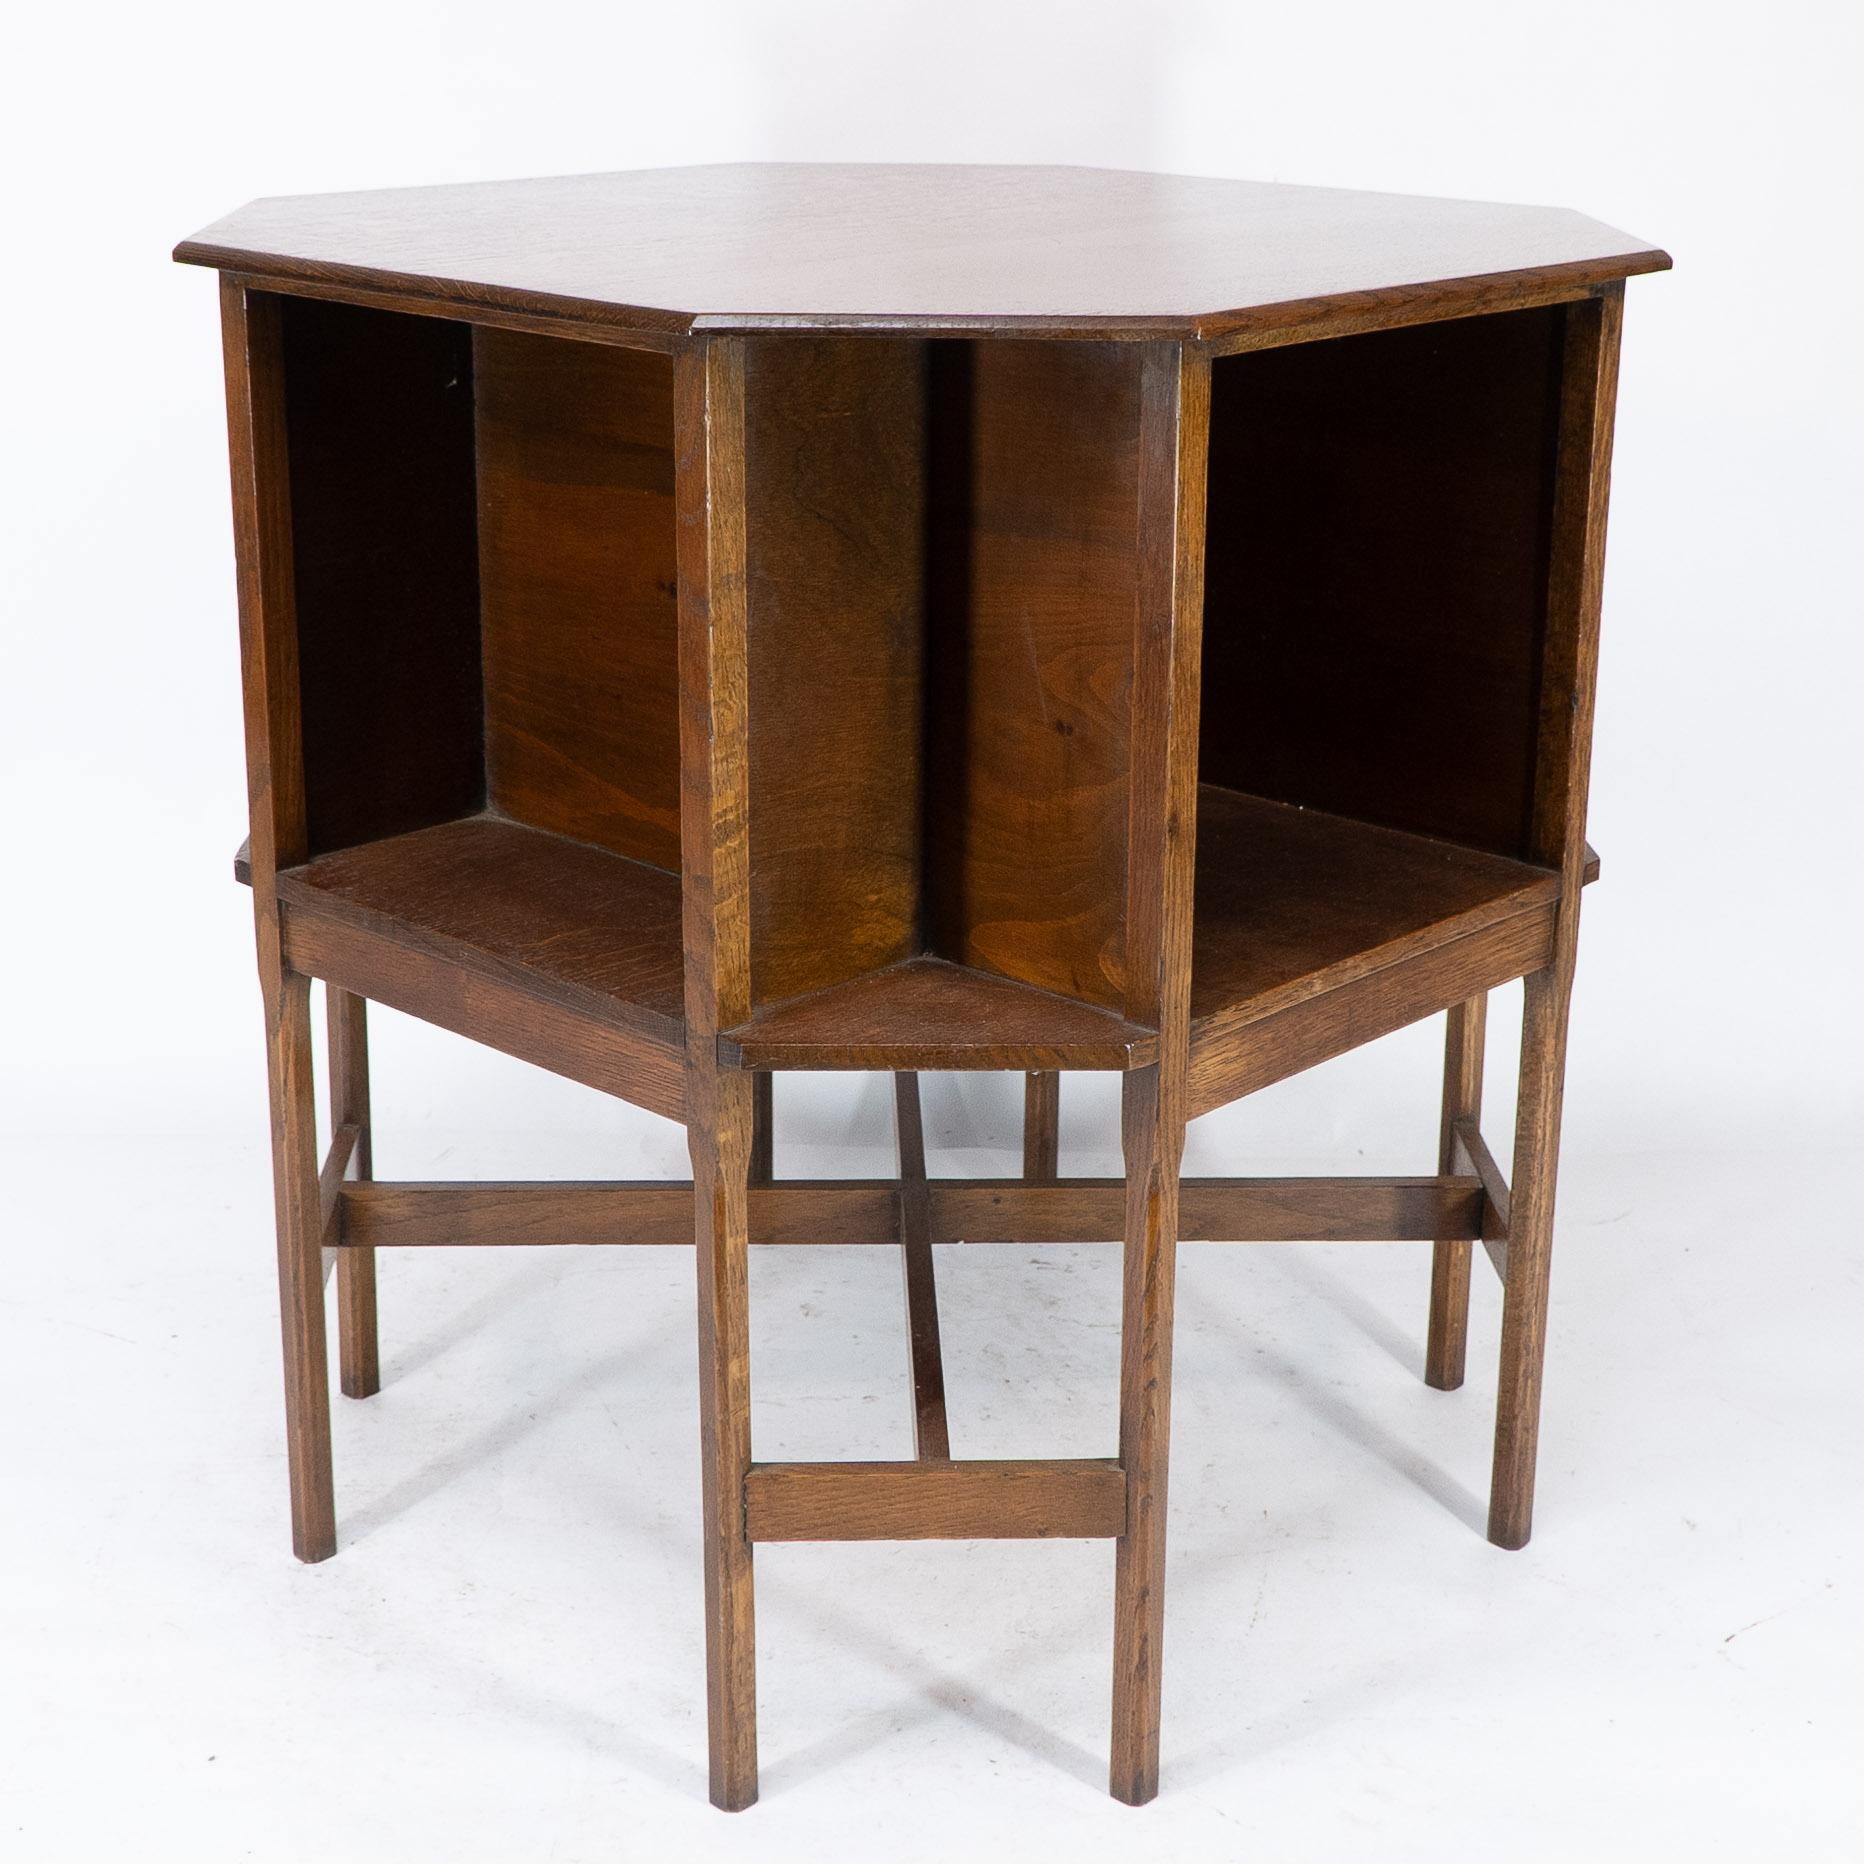 Ambrose Heals Attri, An Arts & Crafts Oak Octagonal Book Table with Eight Legs For Sale